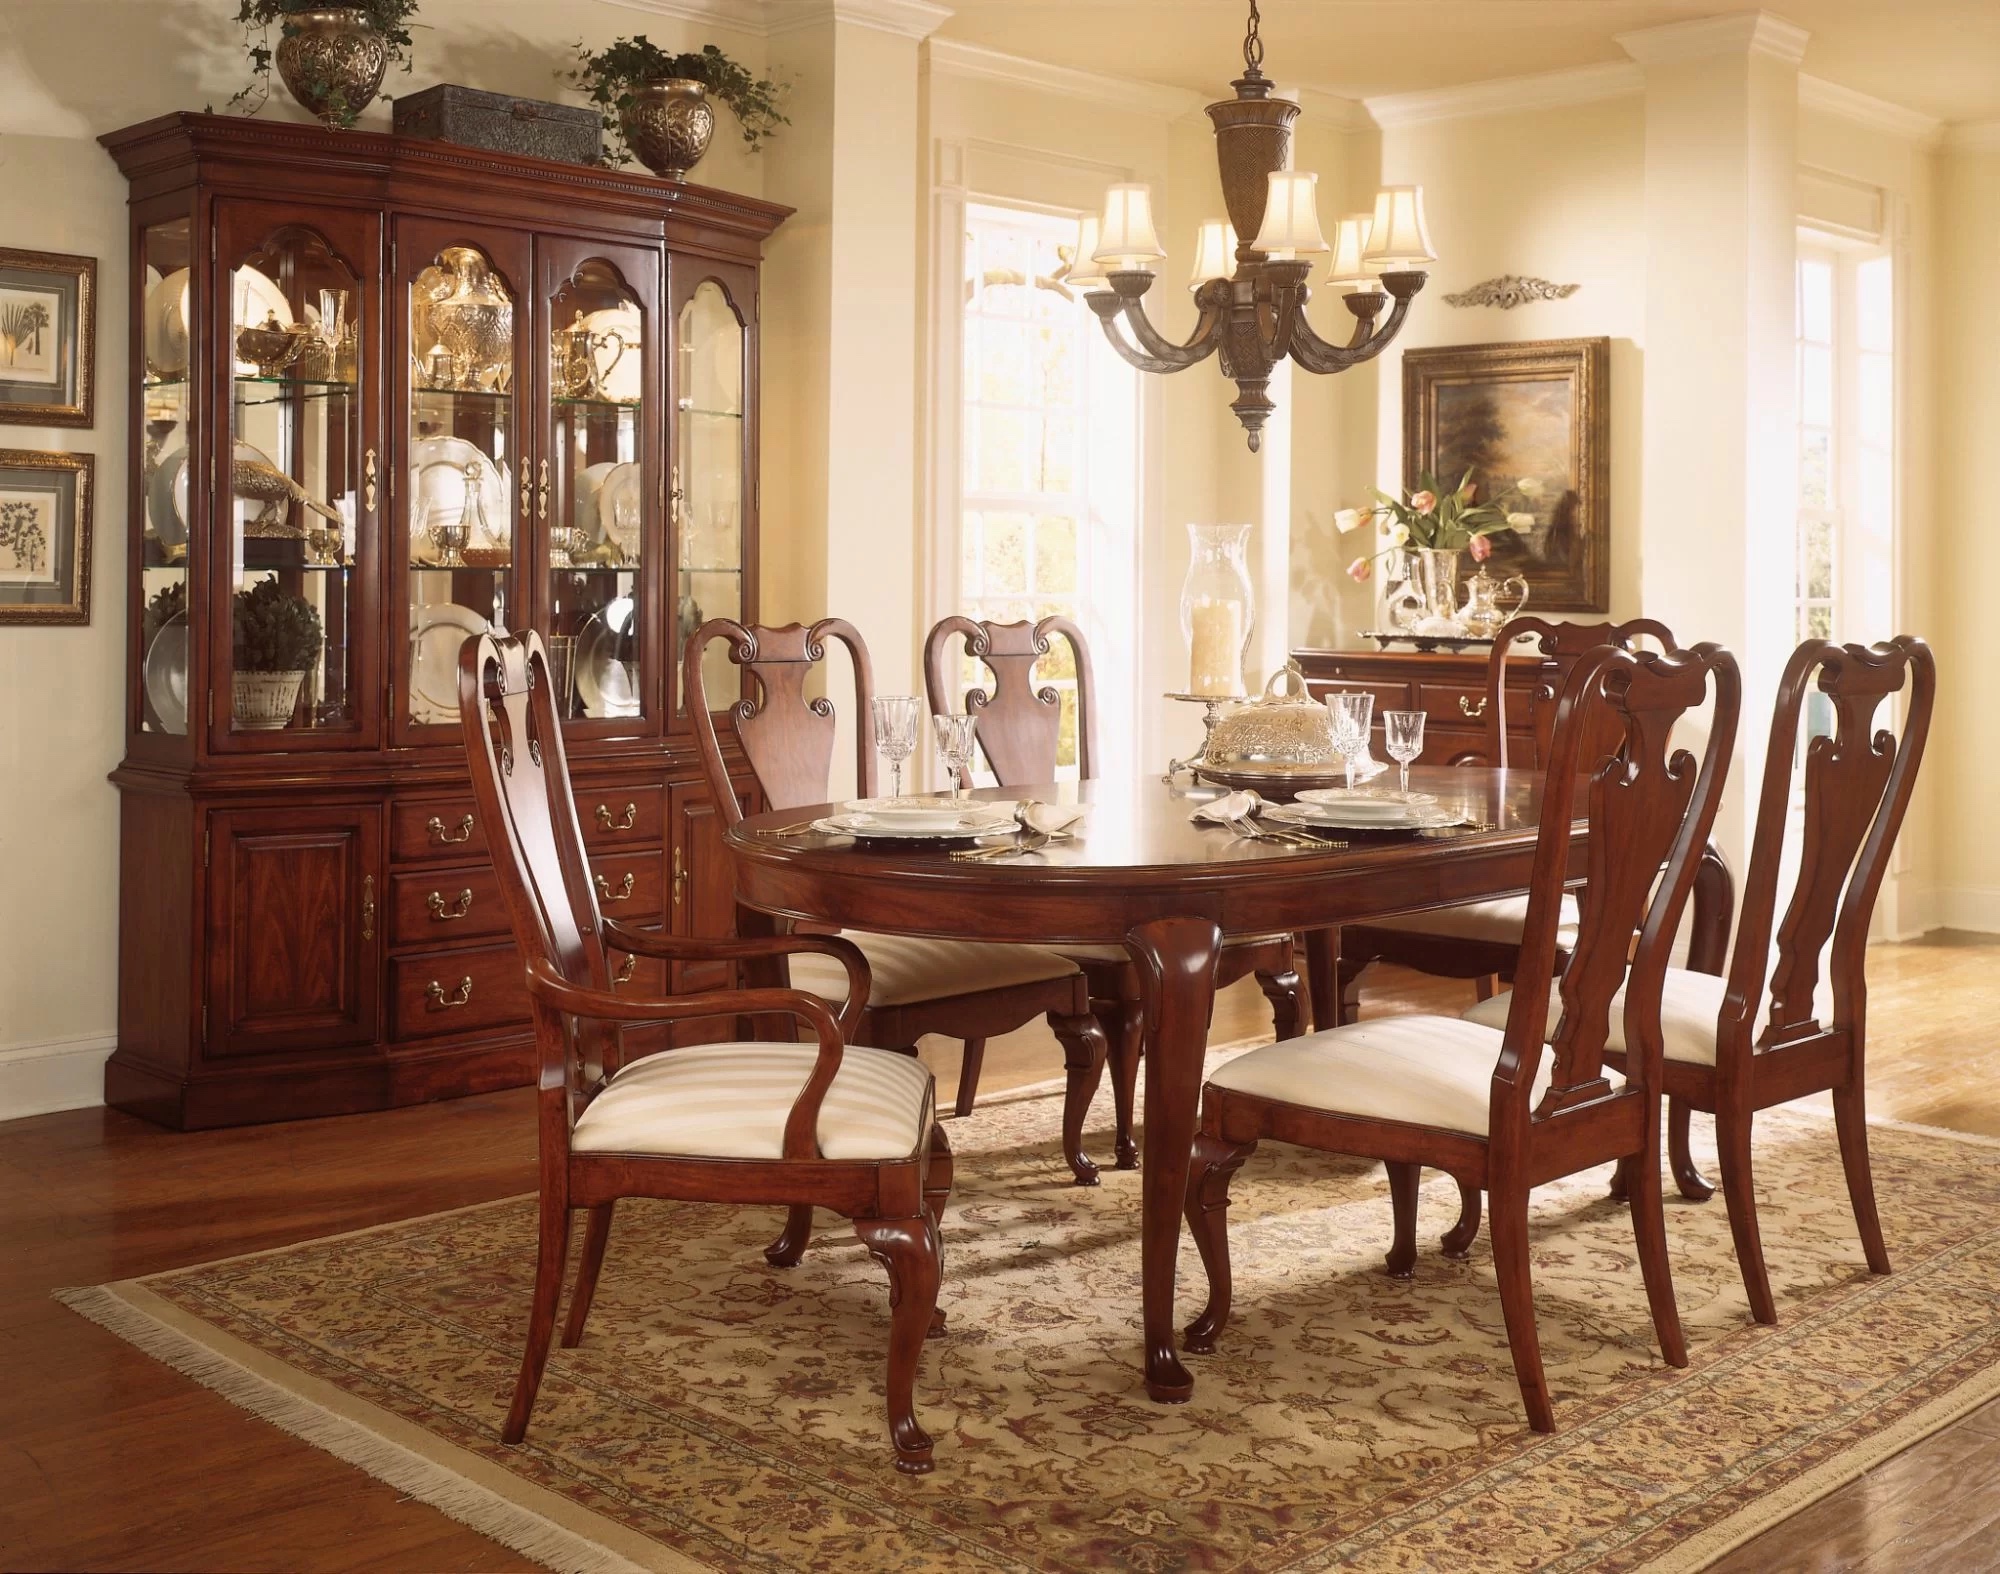 Queen Anne Chairs around Dining Room Table